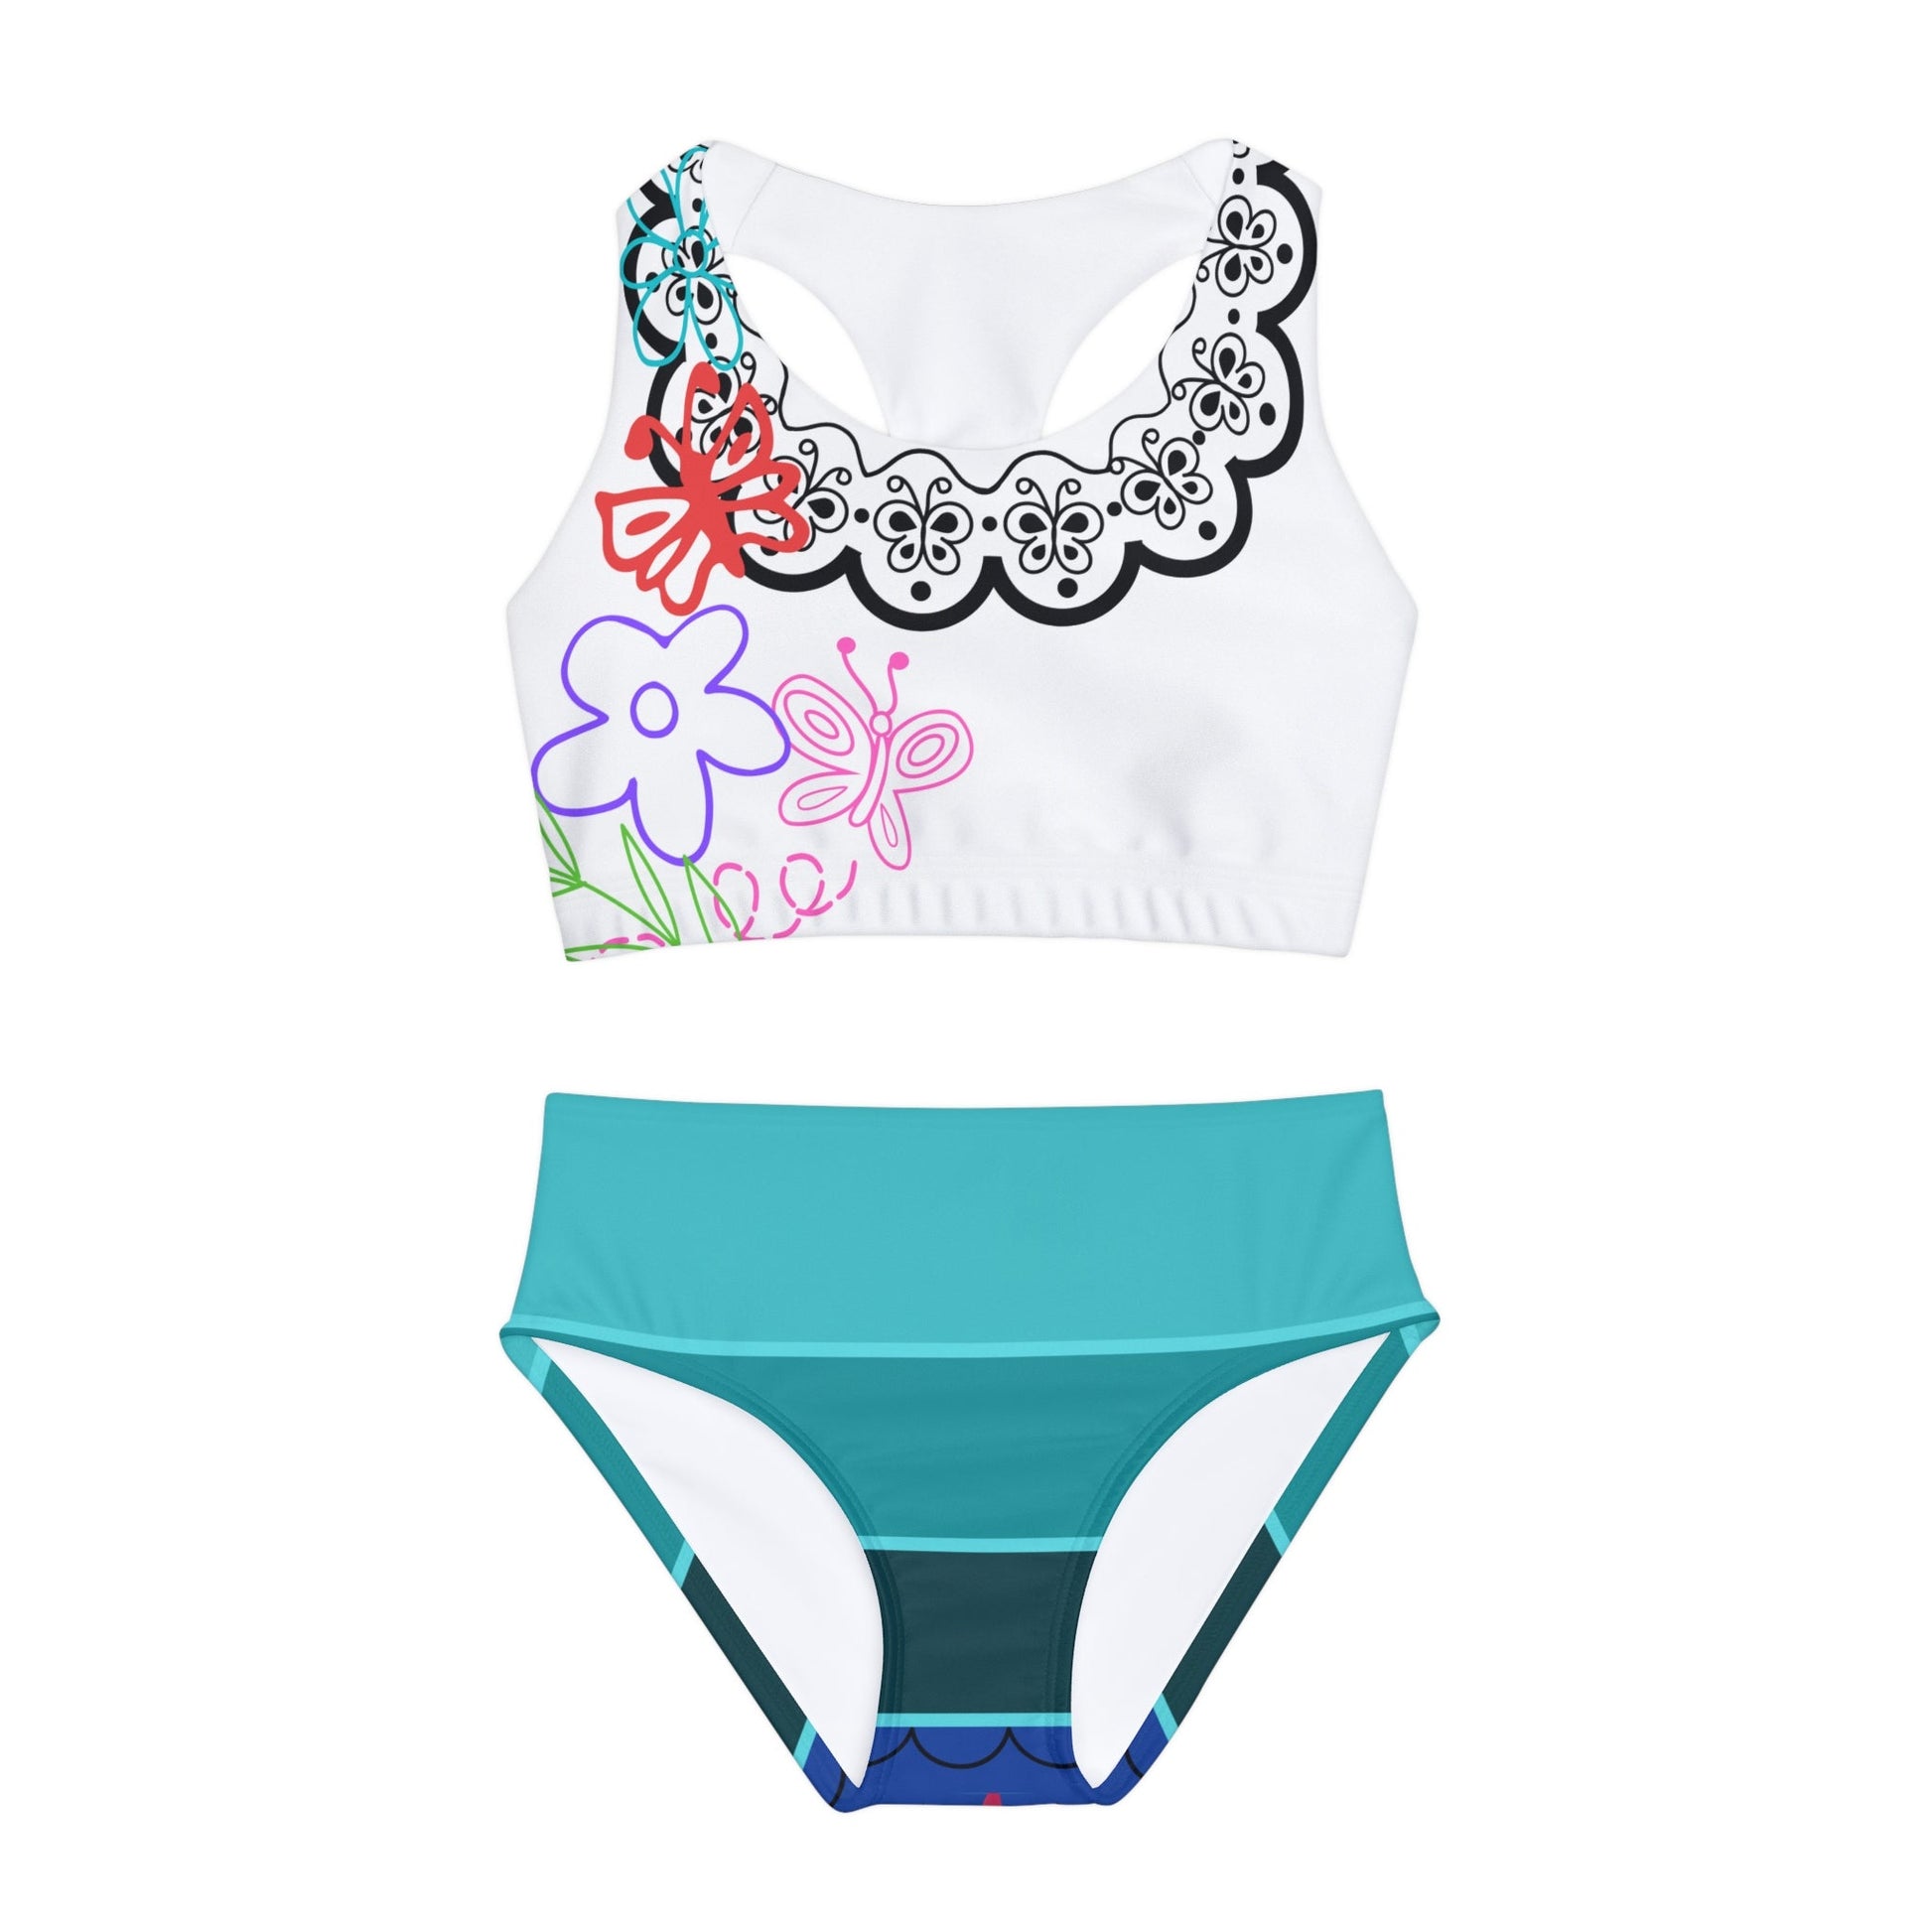 The Mirabel Girls Two Piece Swimsuit All Over PrintAOPswim suitLittle Lady Shay Boutique